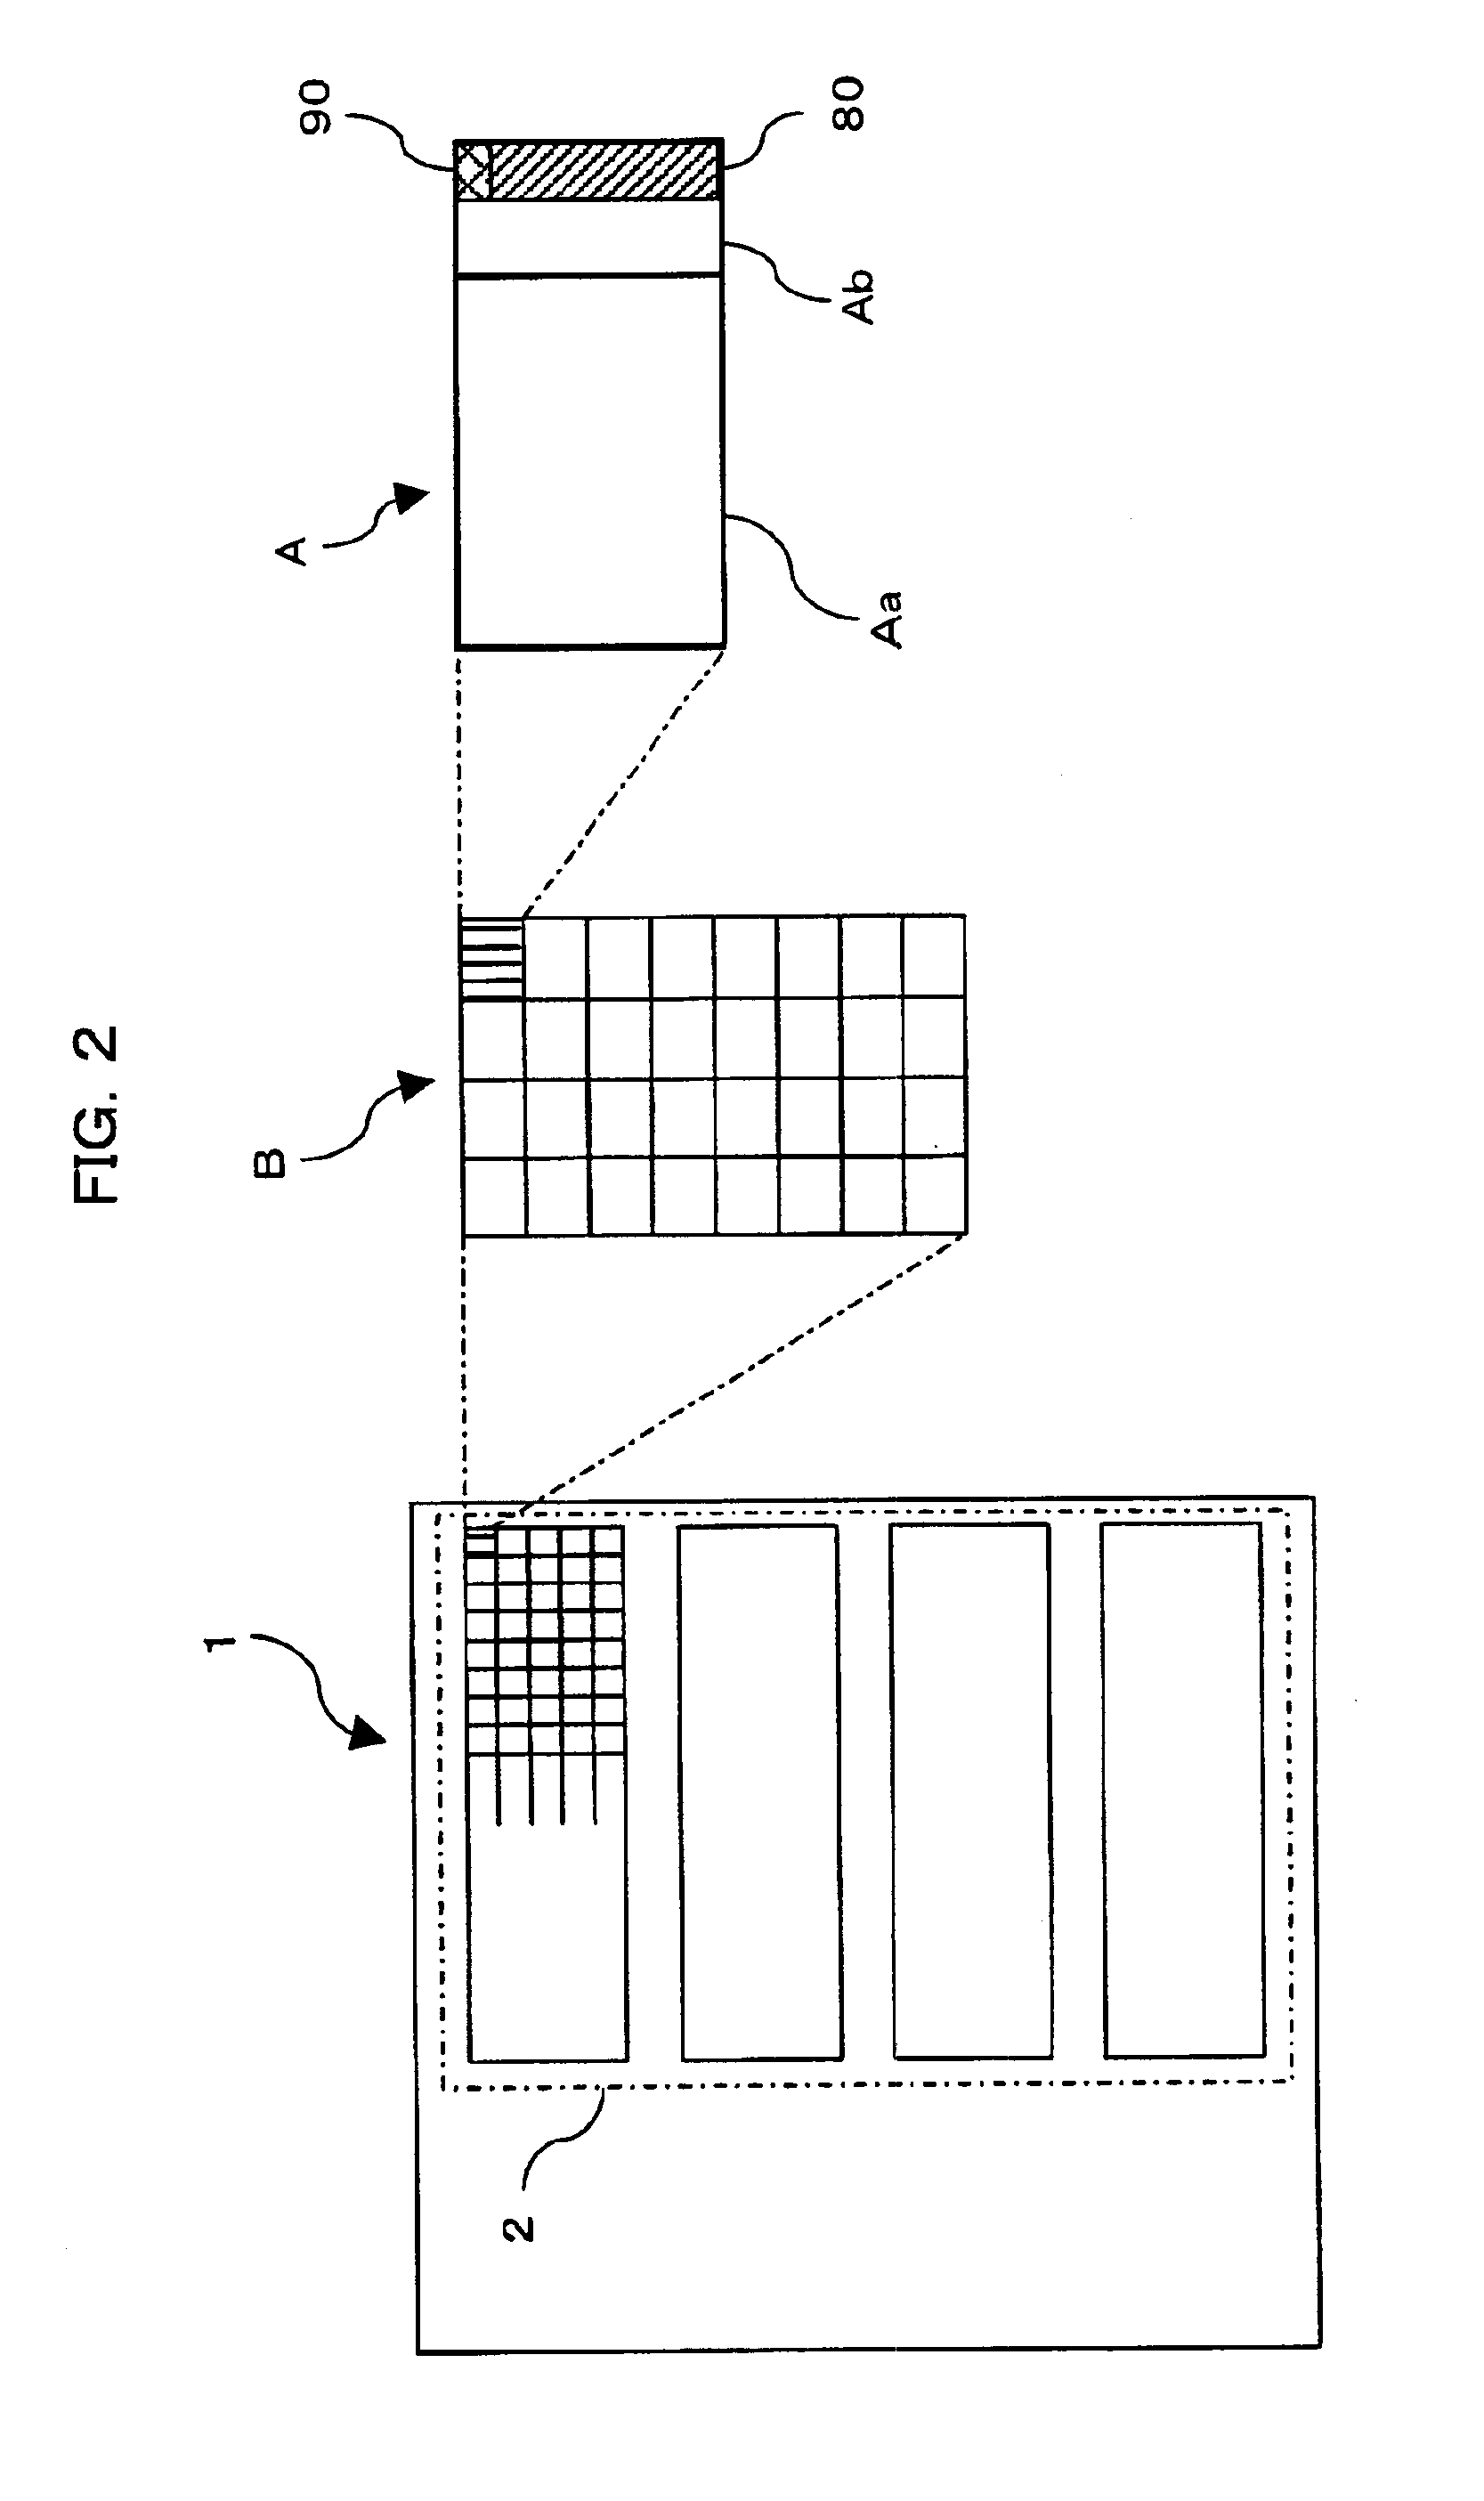 Address conversion unit for memory device